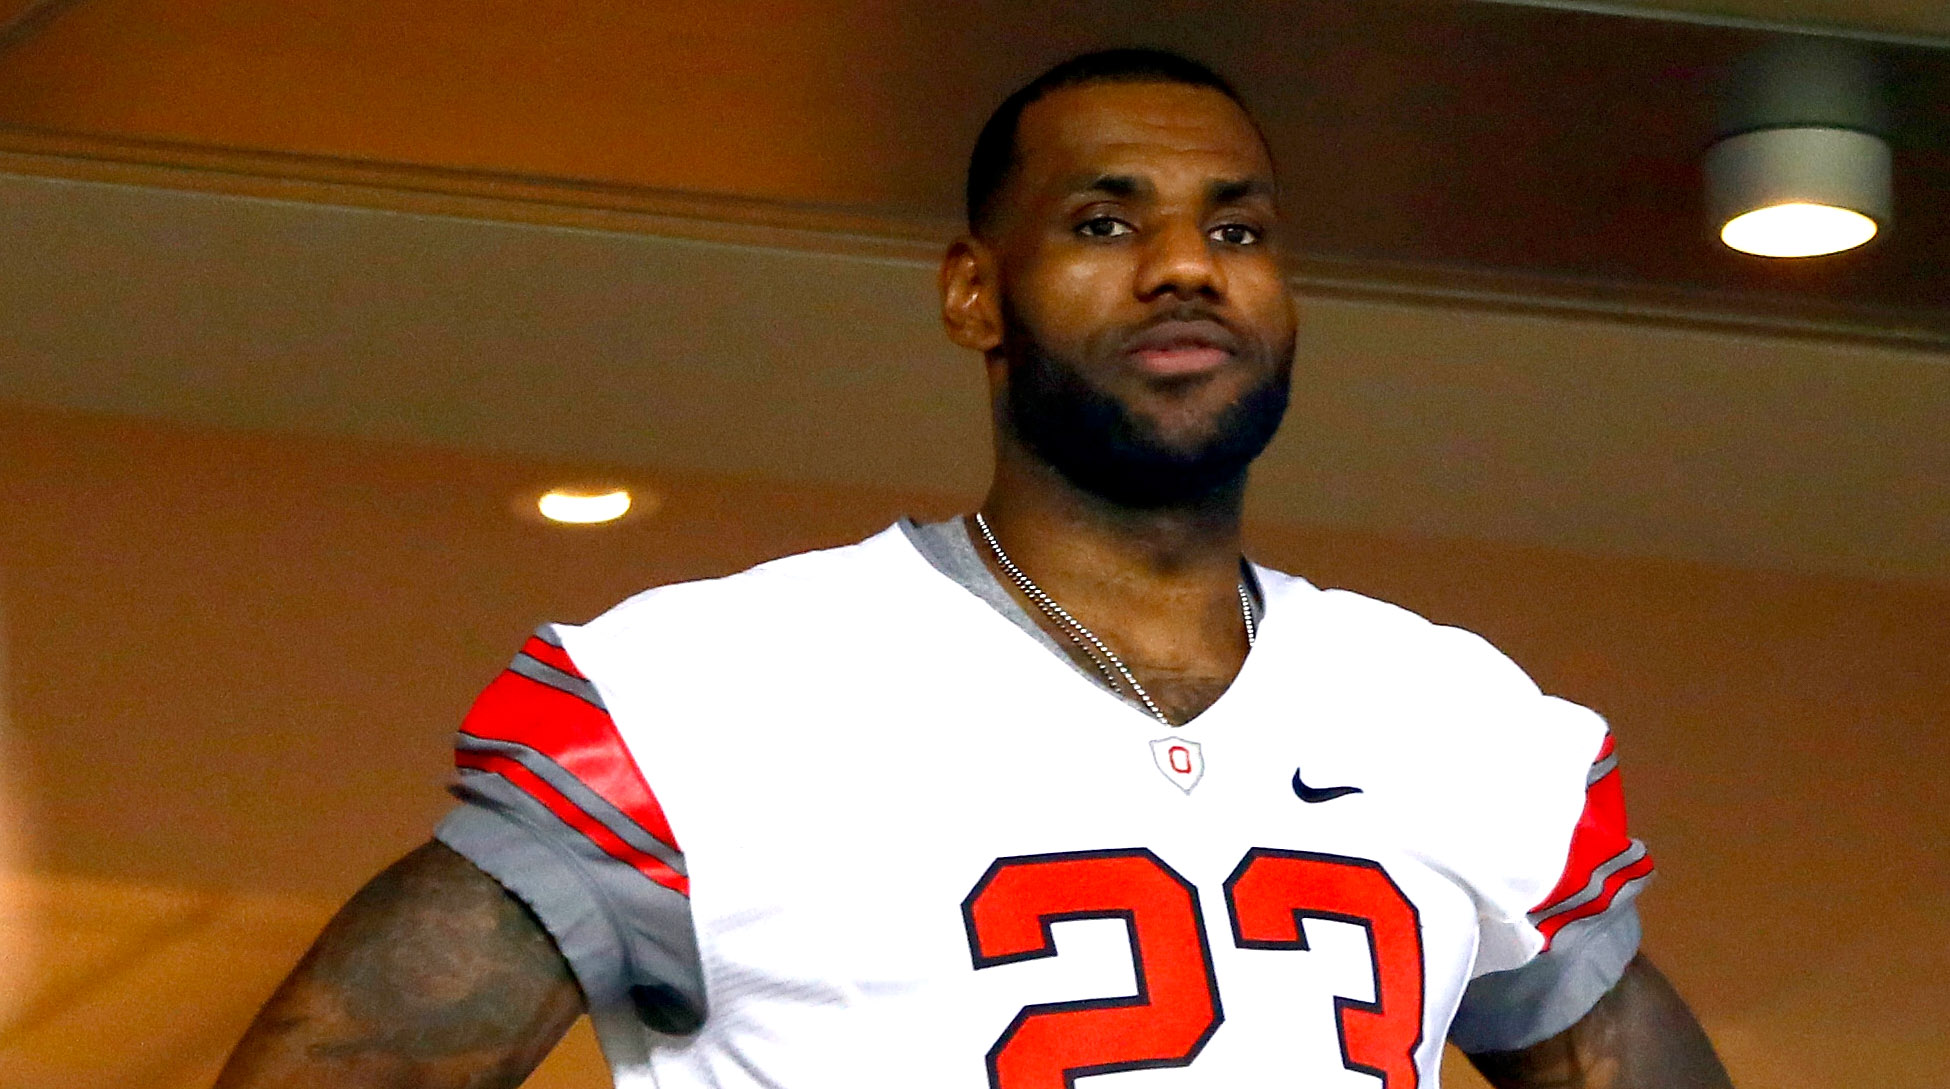 LeBron James' alternate history as a football player, imagined by experts 